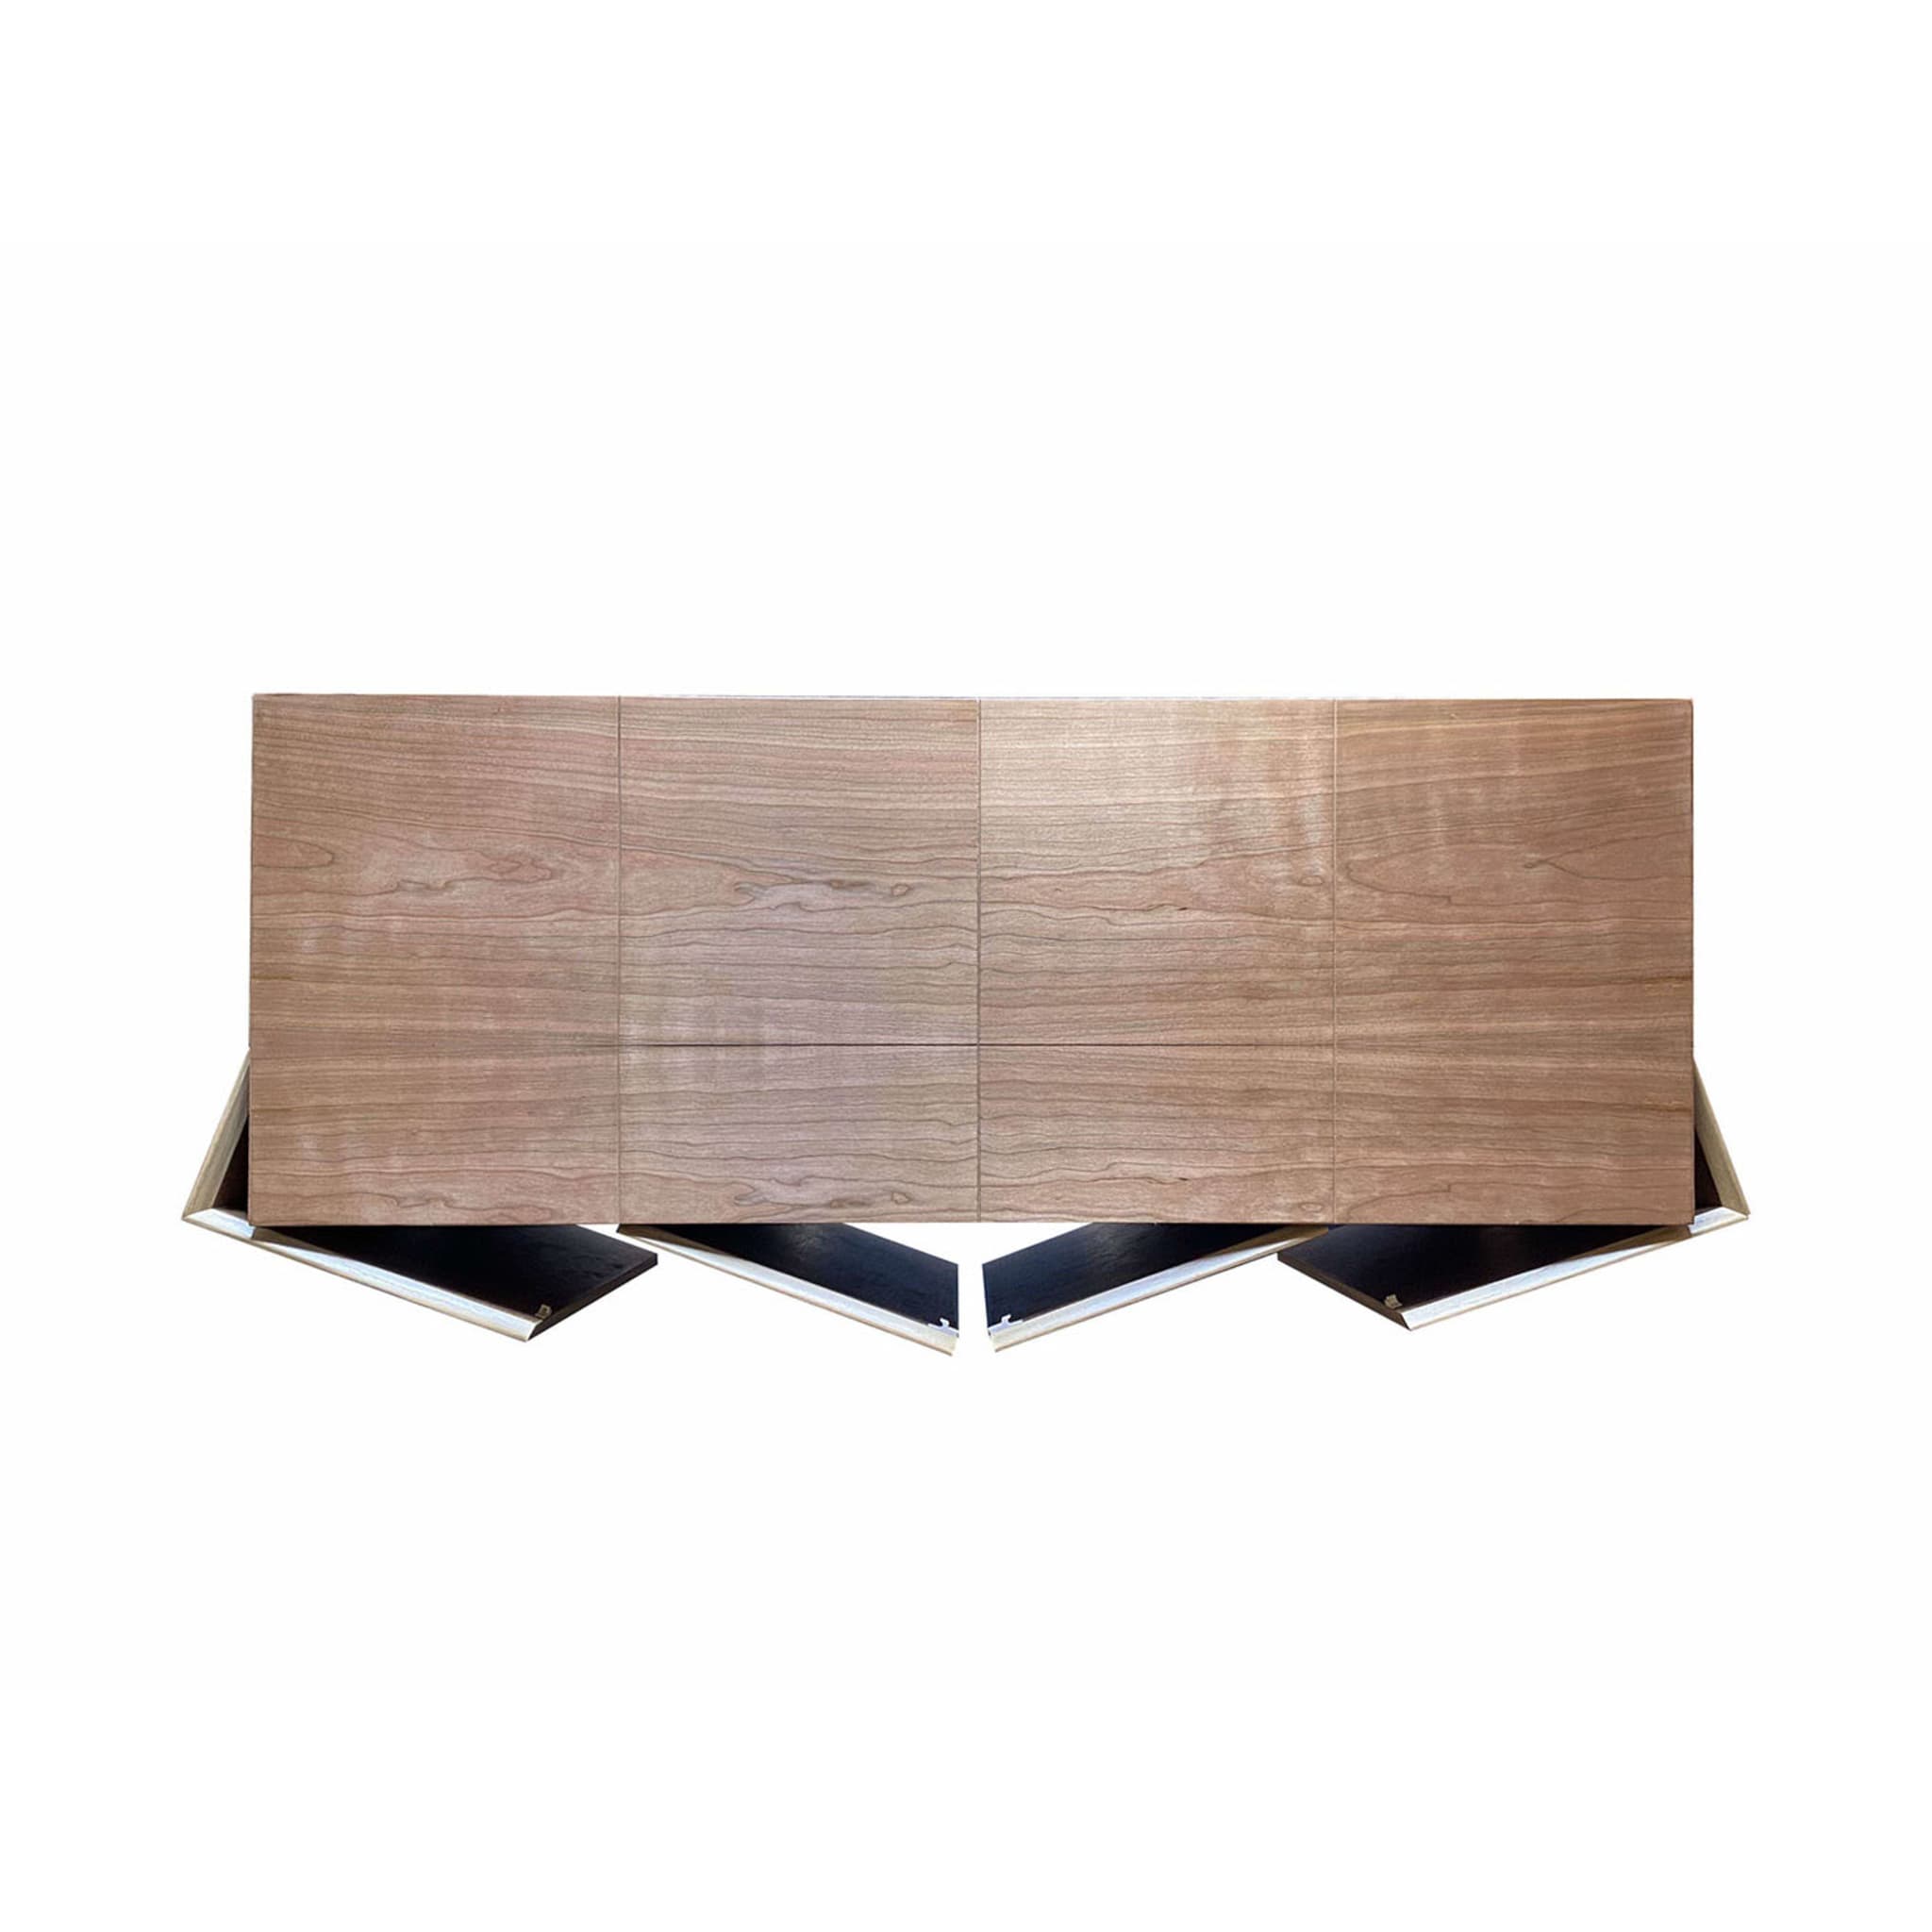 Md3 4-Door Striped Sideboard by Meccani Studio - Alternative view 3